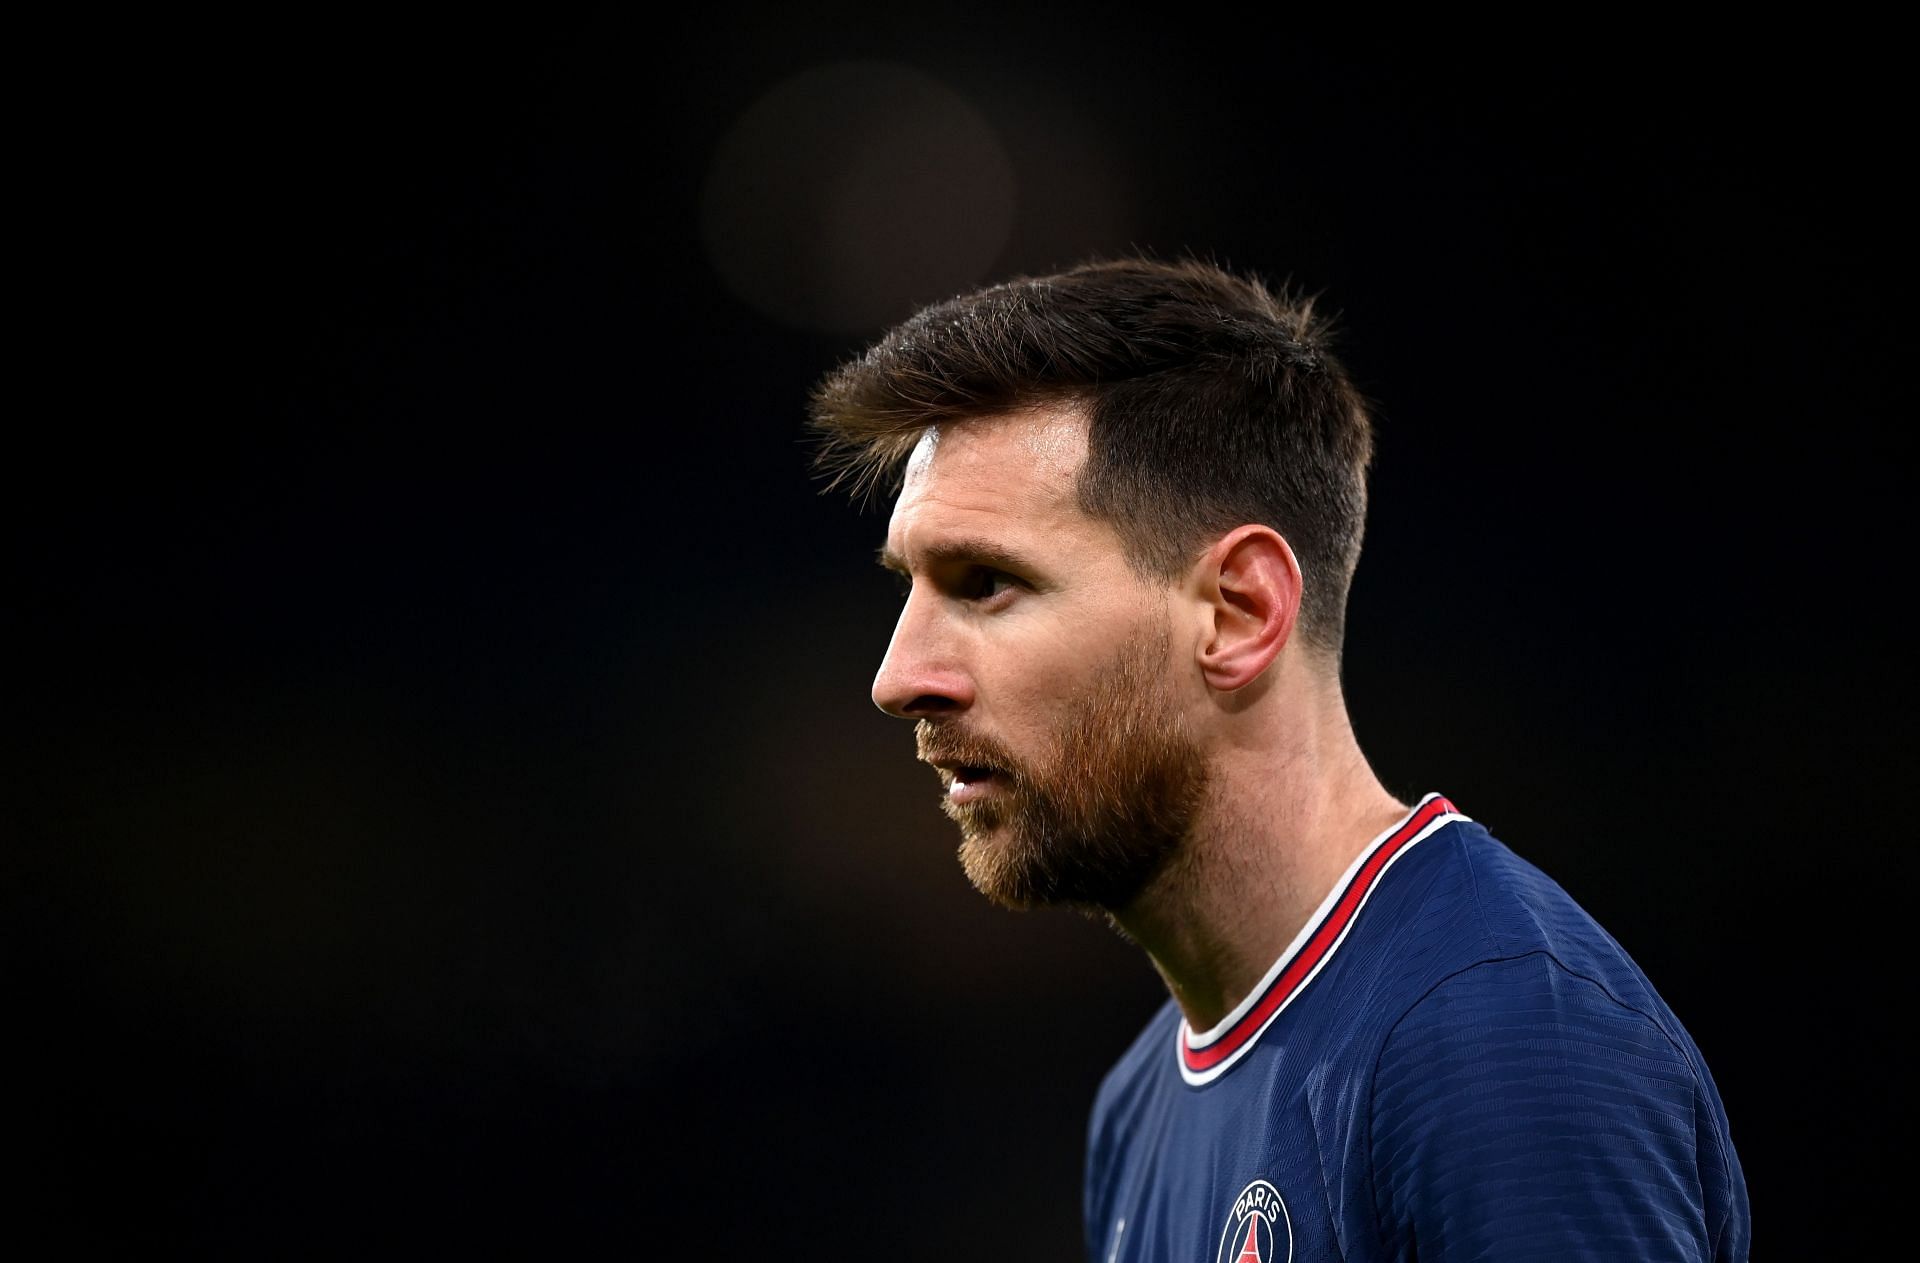 Lionel Messi has had an indifferent start to his Ligue 1 career